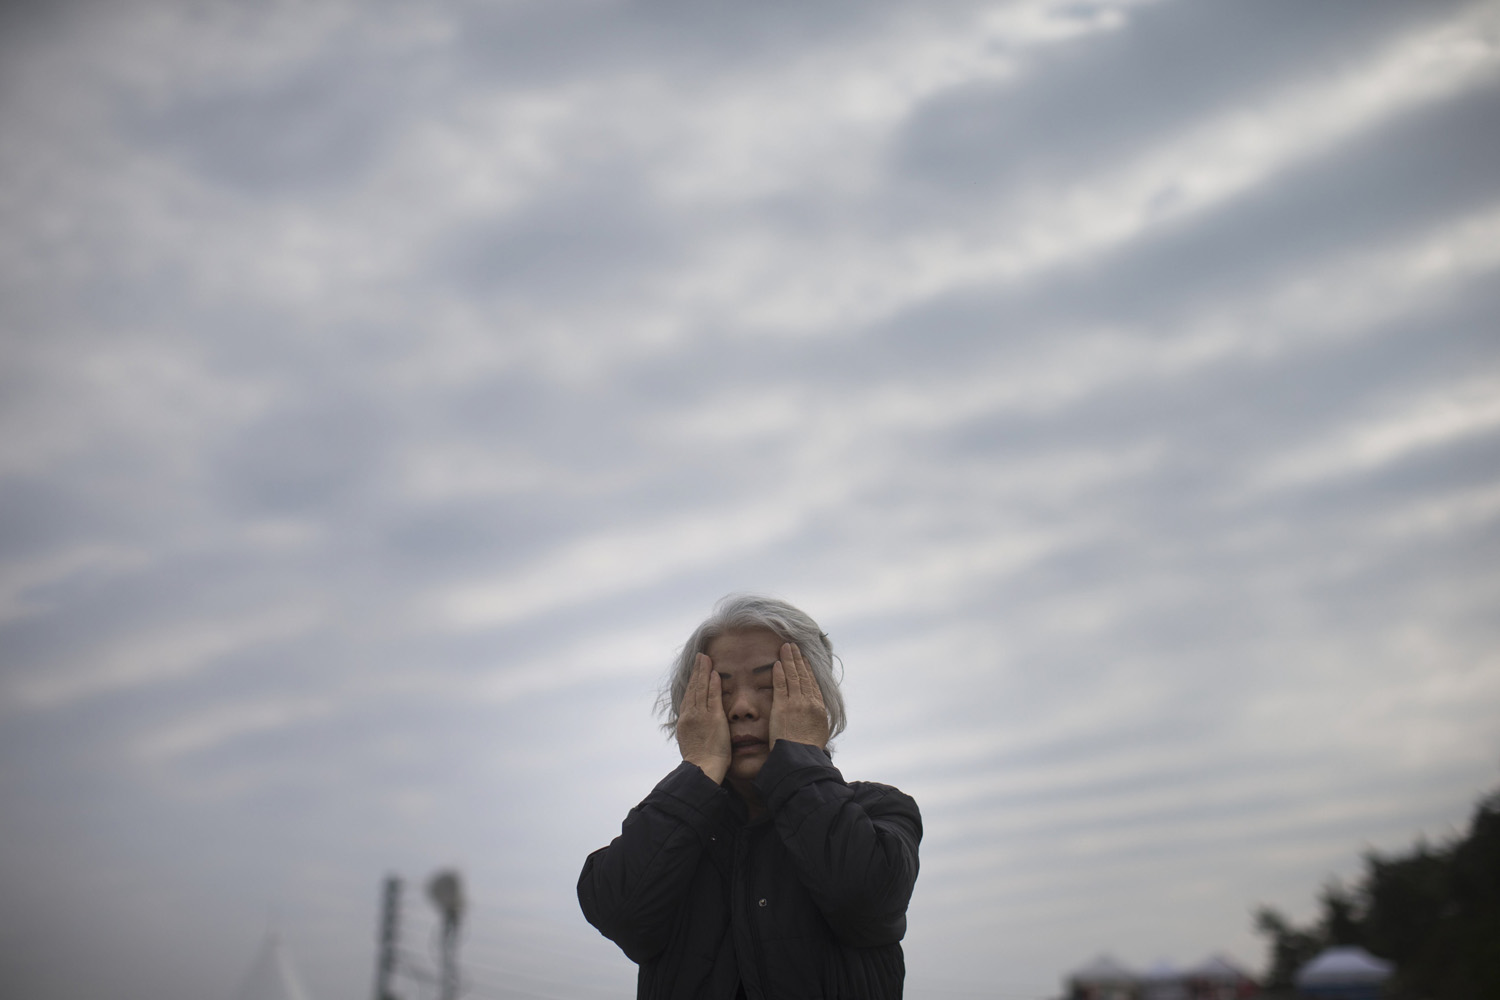 Apr. 22, 2014. A relative of a missing passenger from the sunken Sewol ferry weeps by the sea in Jindo, South Korea.